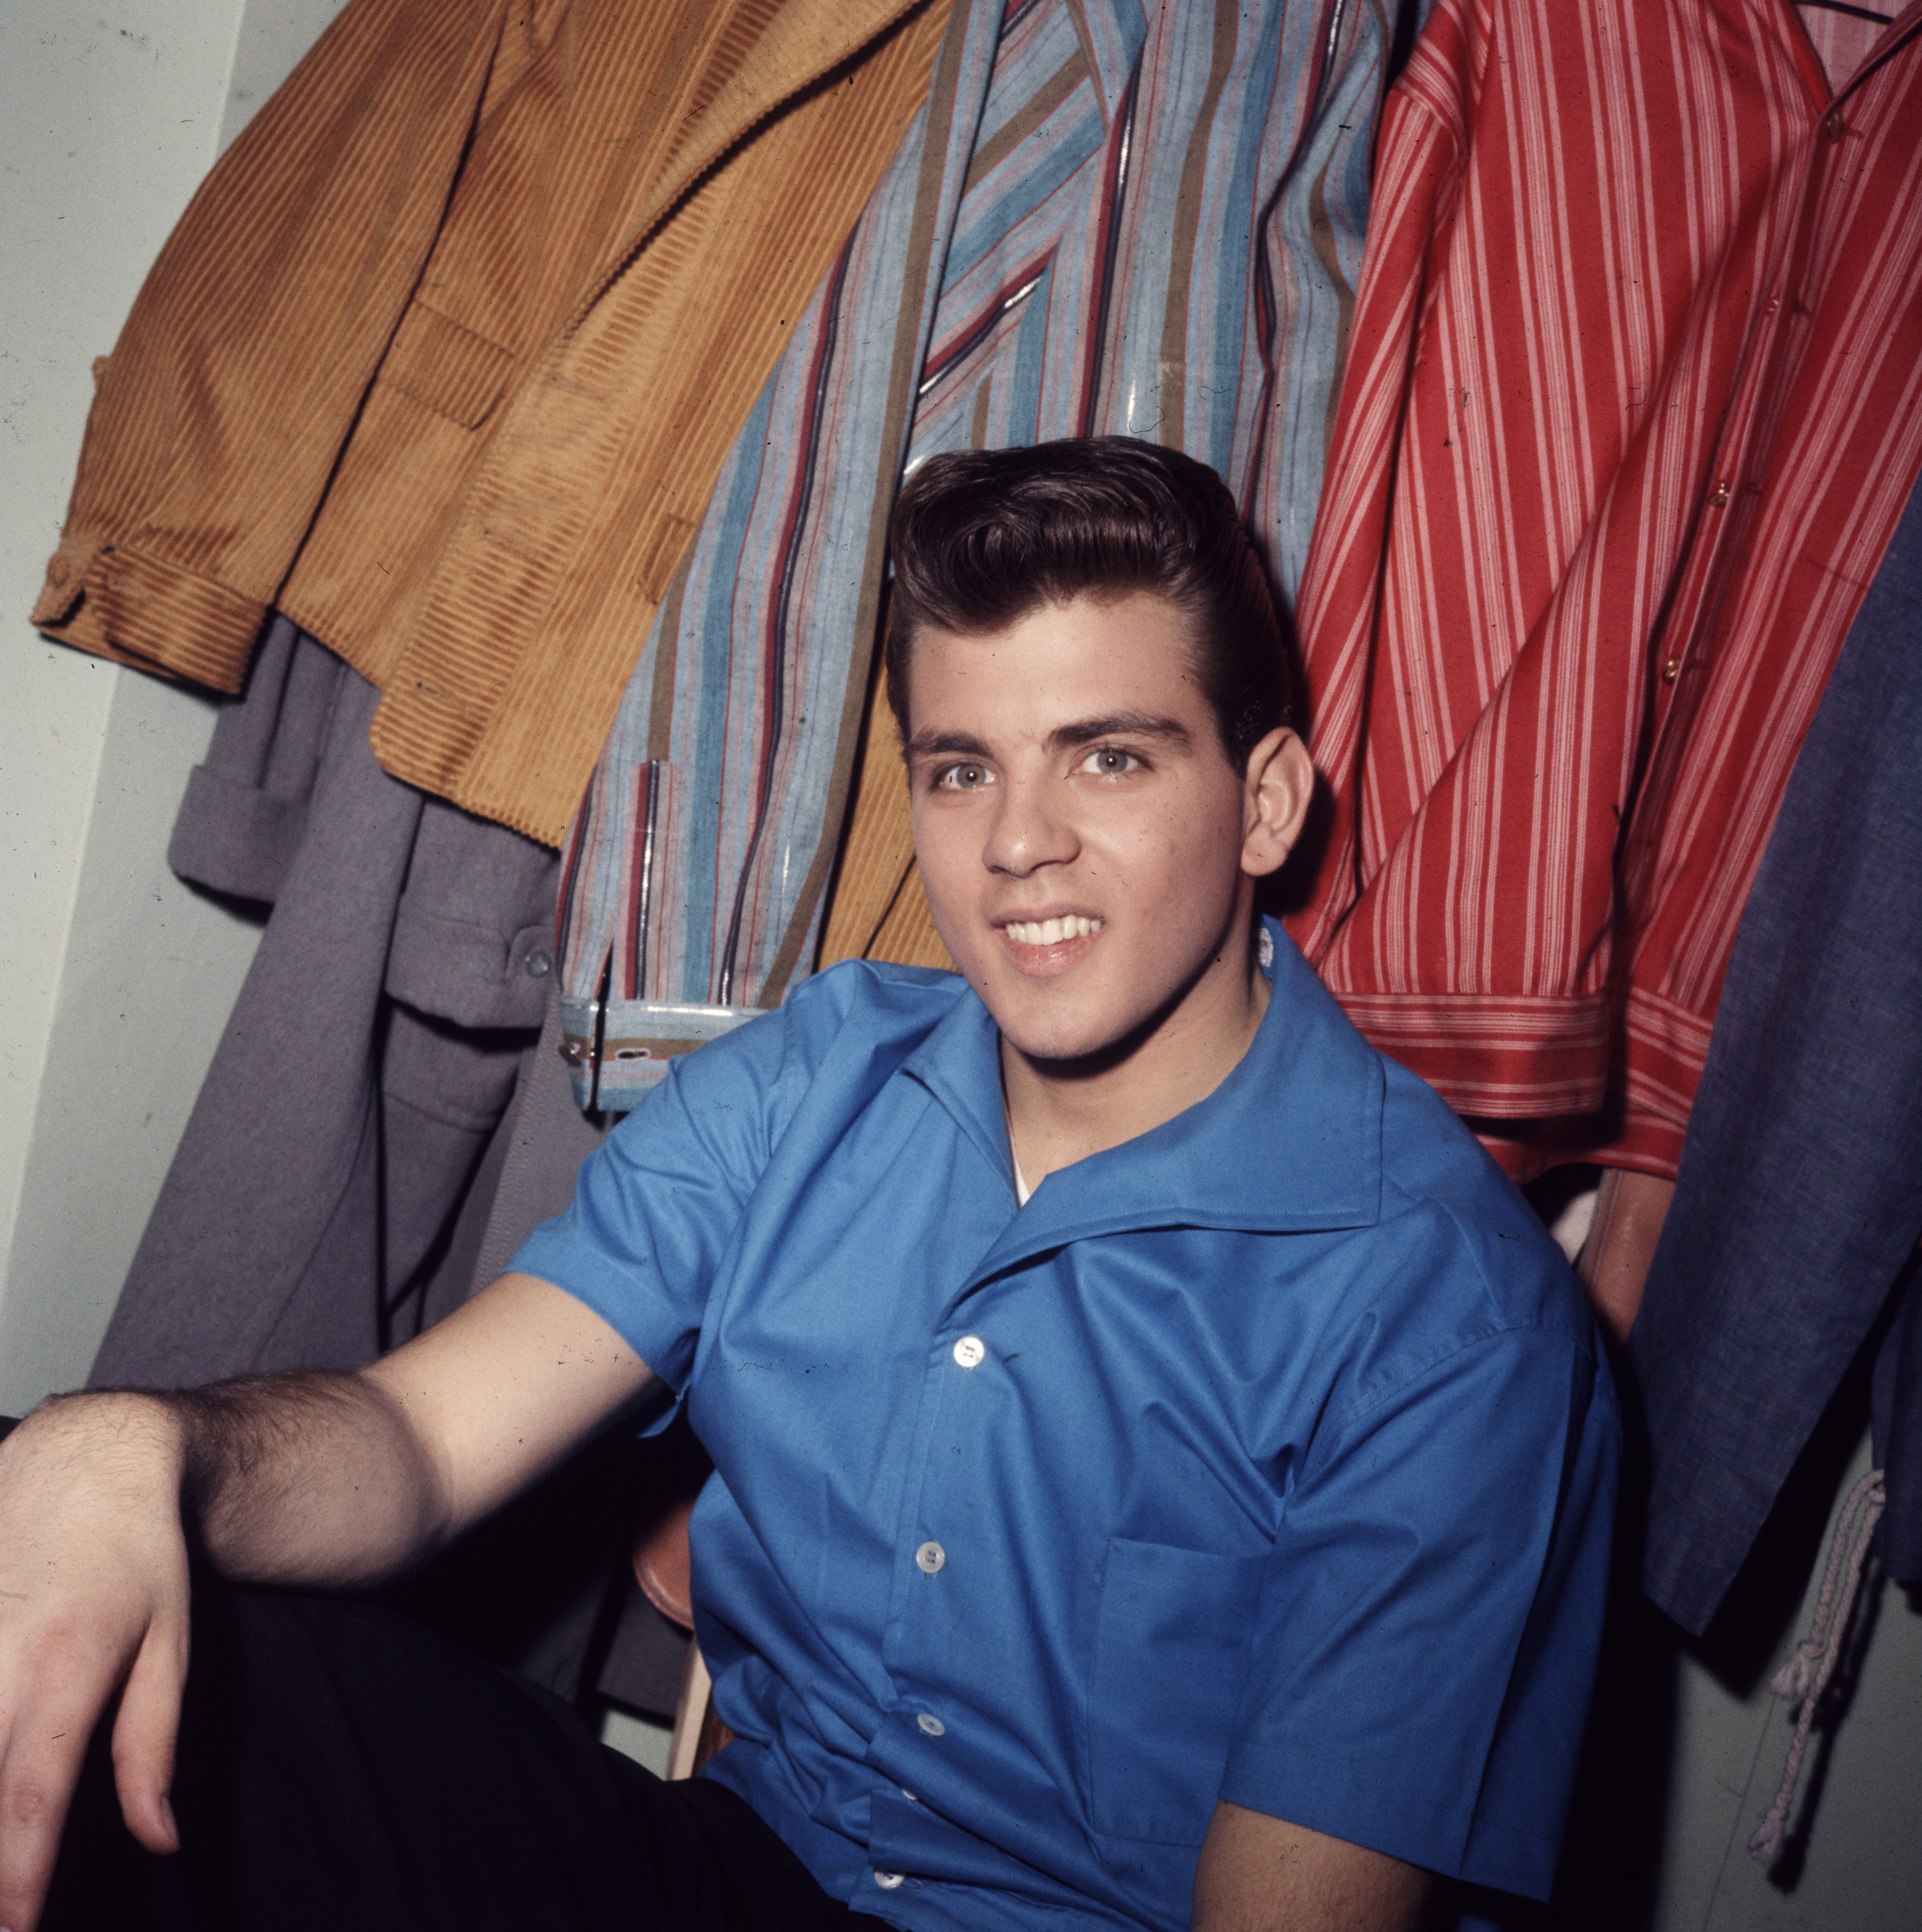 Portrait of American pop singer and actor Fabian smiling while sitting in front of several colorful striped shirts circa 1961. | Source: Getty Images